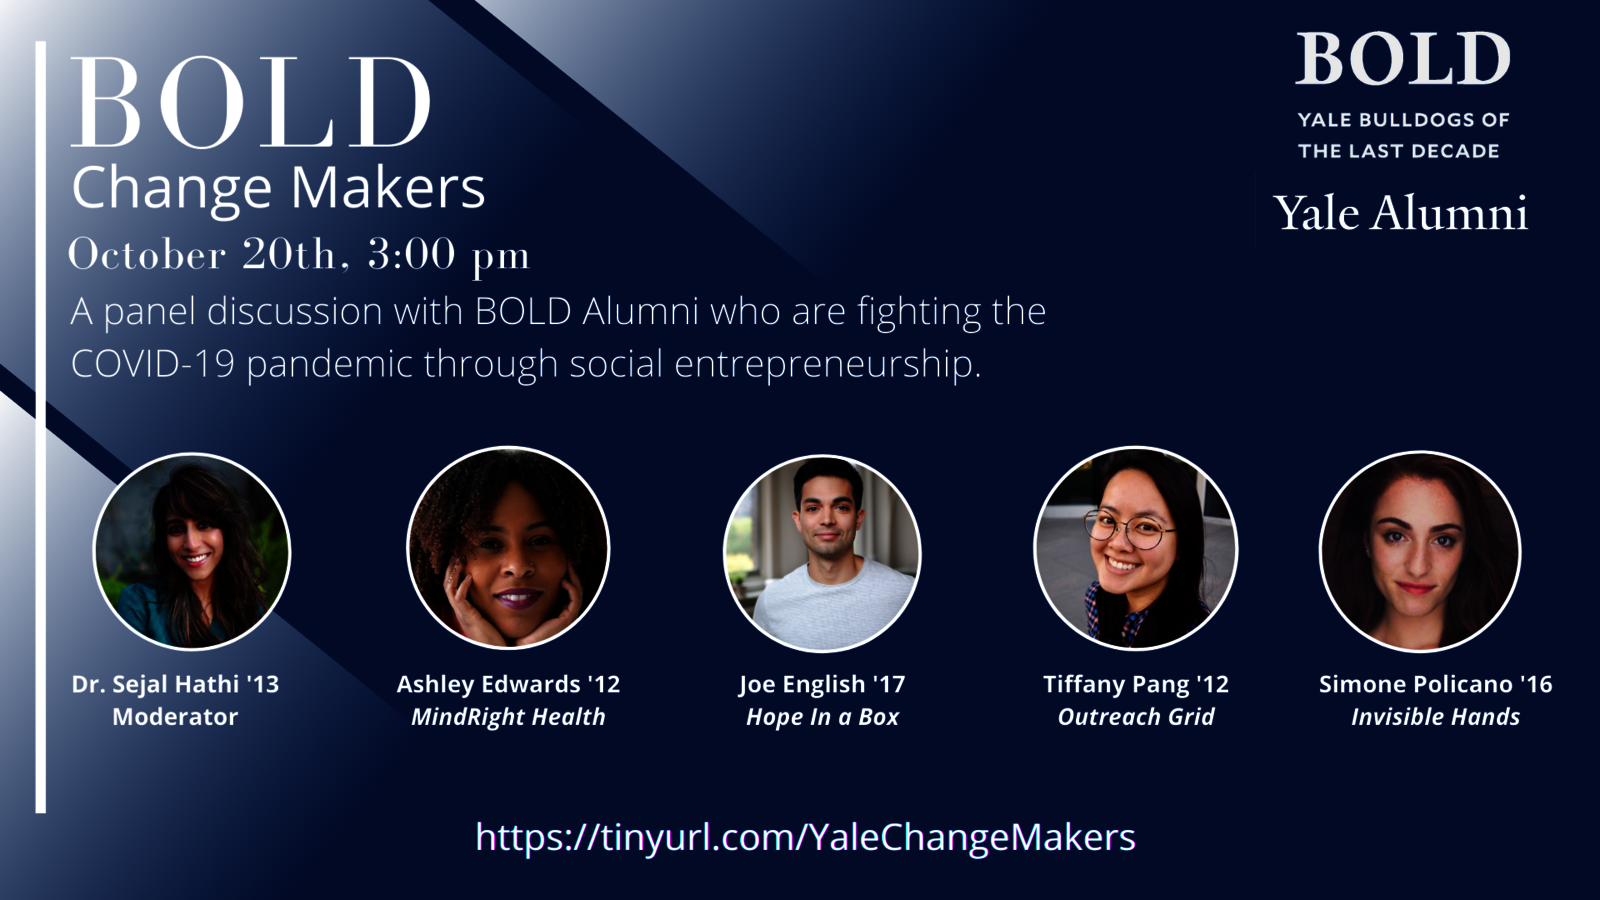 BOLD Change Makers